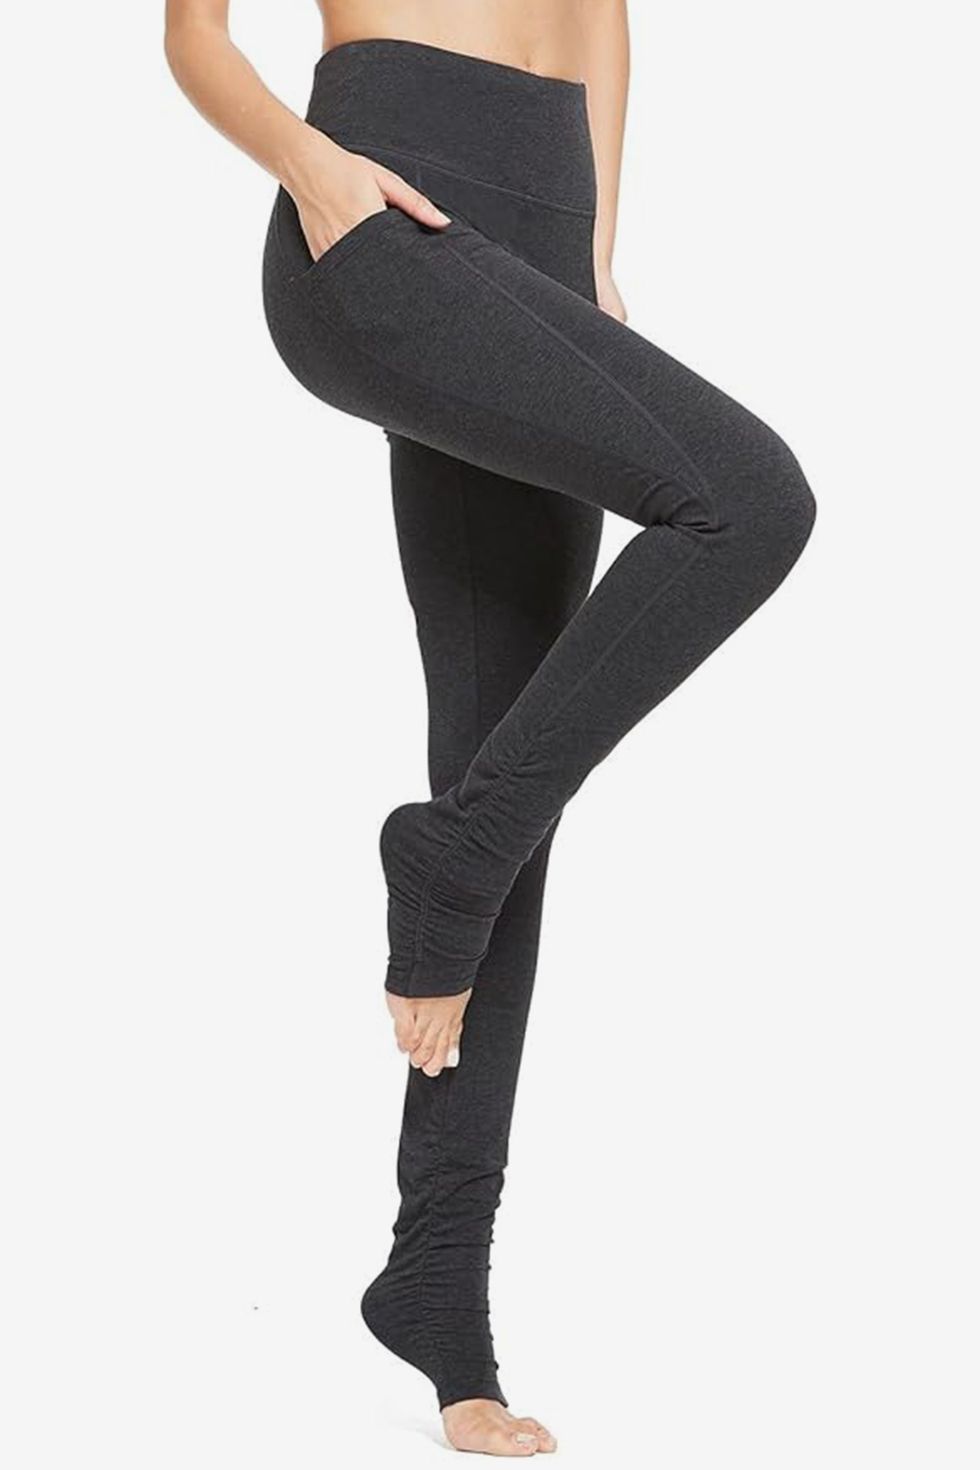 Yogalicious Squat Proof Fleece Lined High Waist Legging with